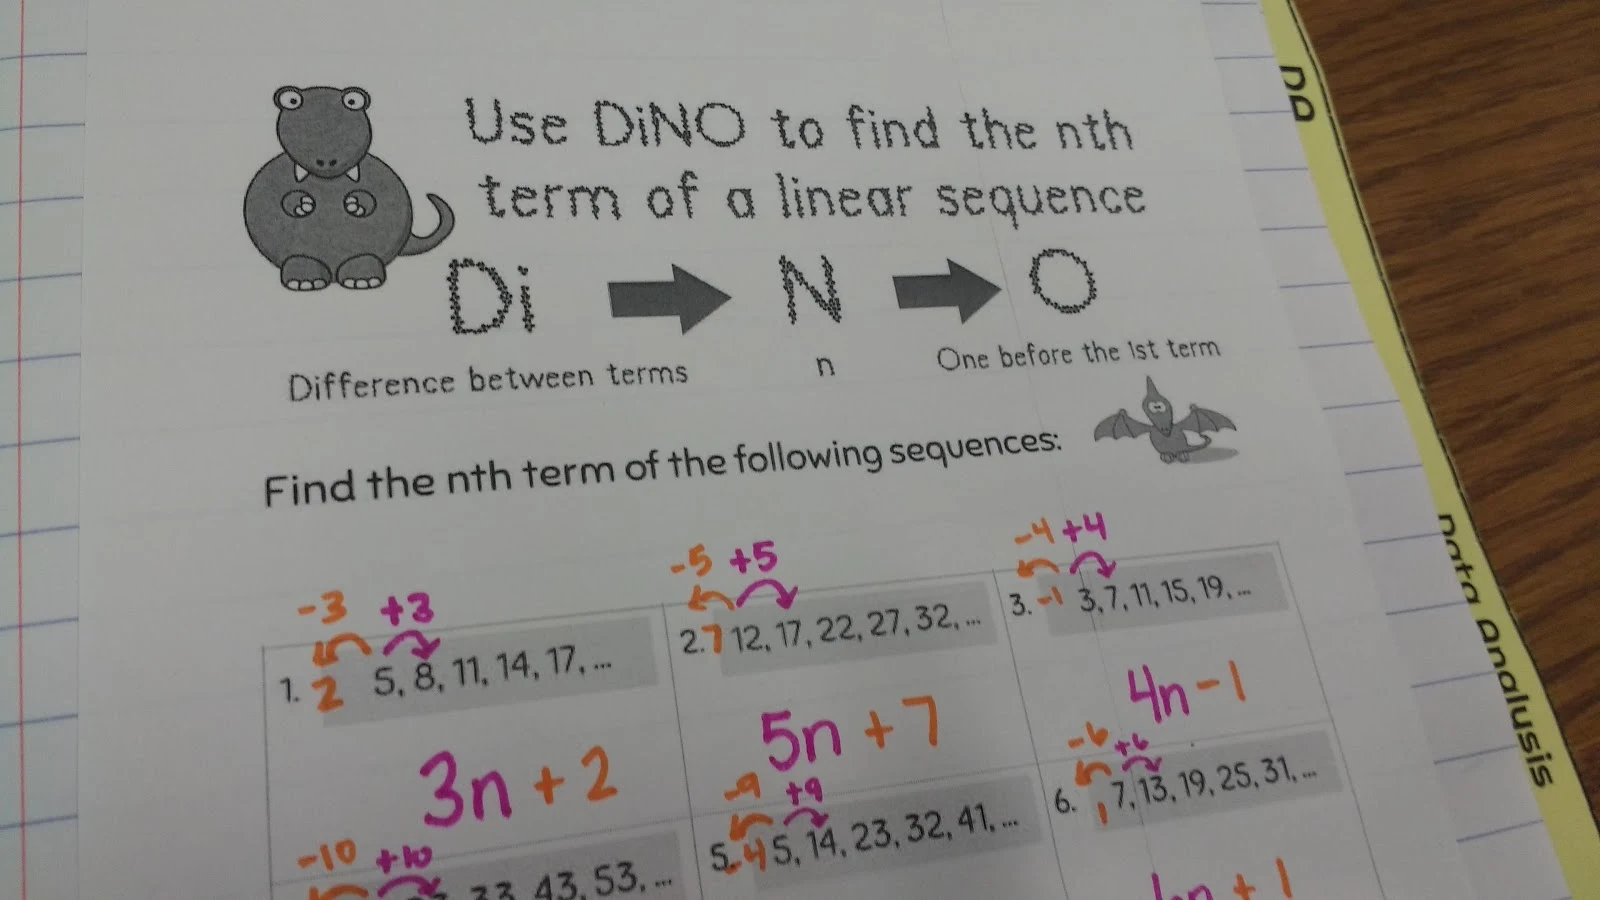 DINO Method for Finding the nth Term of an Arithmetic Sequence